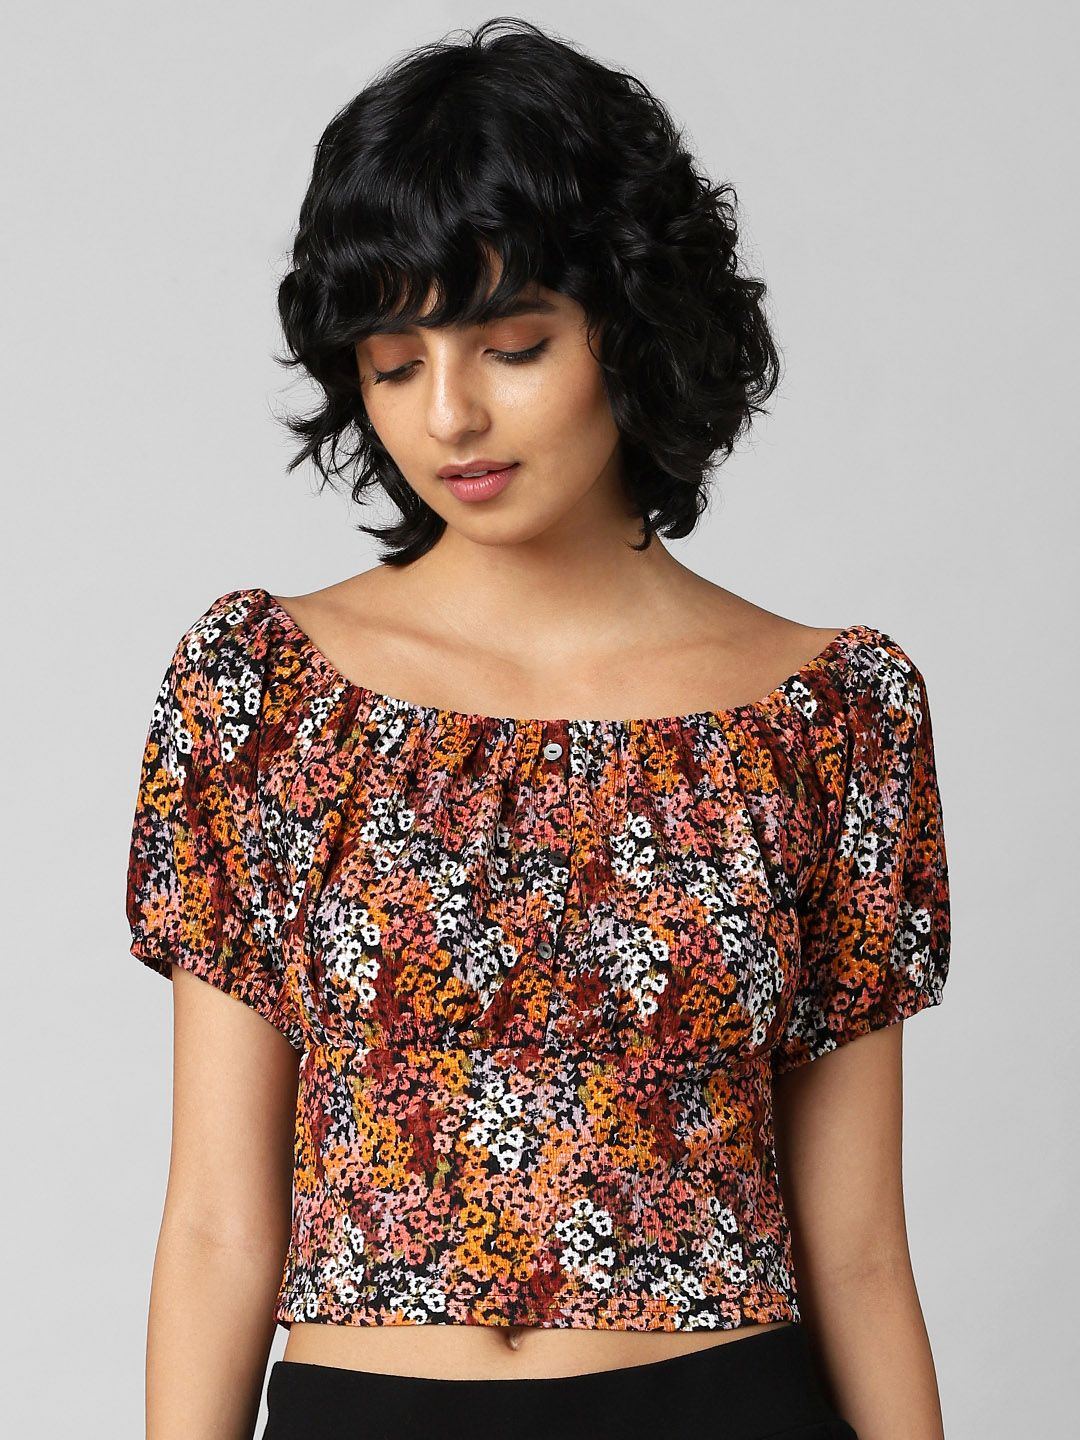 ONLY Women Floral Print Off-Shoulder Bardot Crop Top Price in India